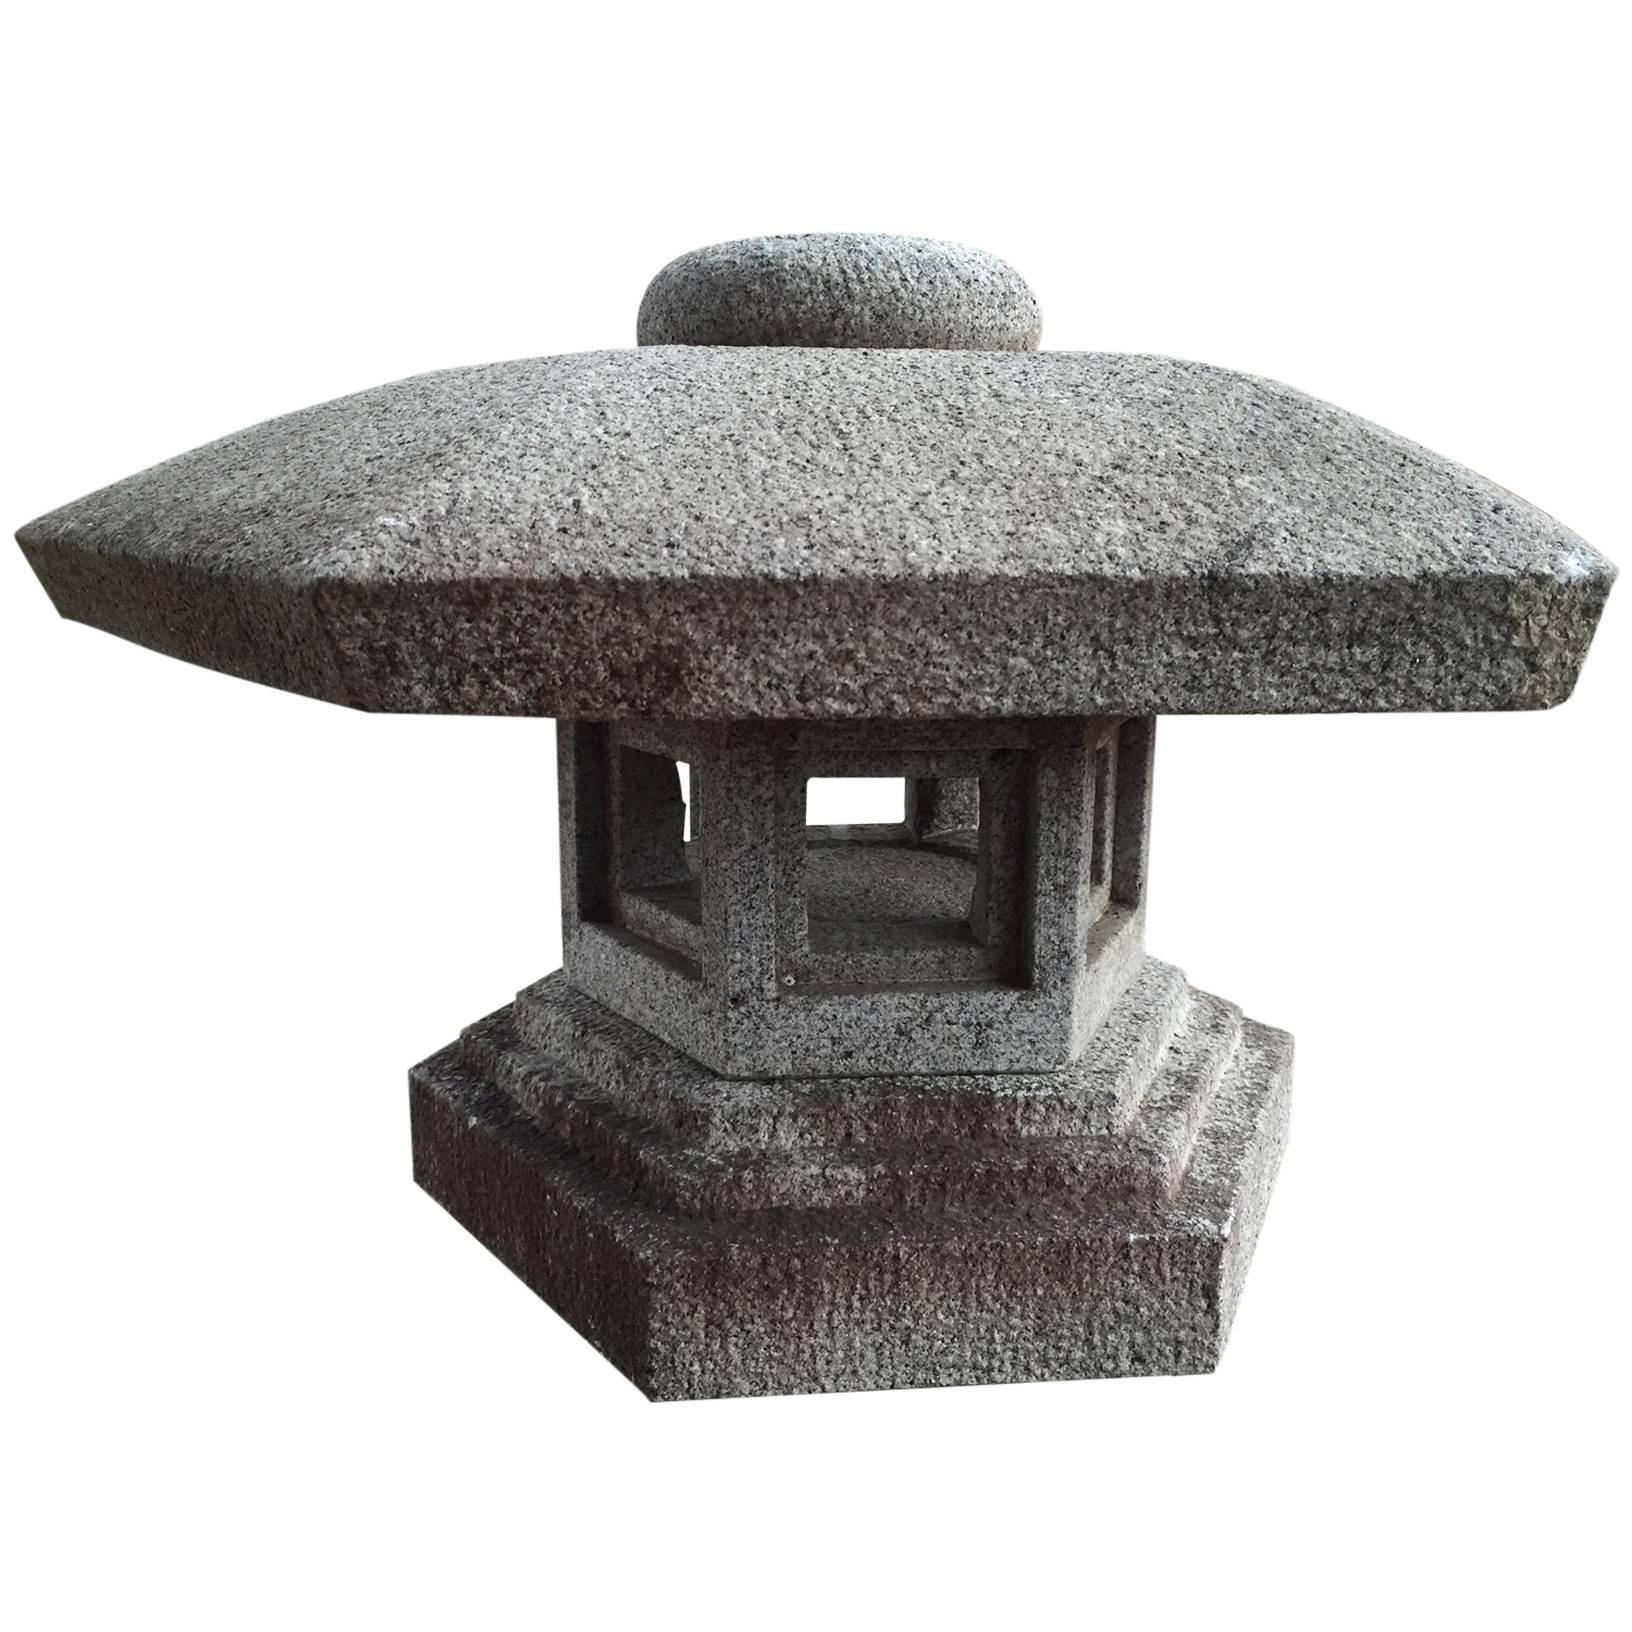 Japan Lantern, Carved Granite, Perfect  Indoor or Outdoor Free Shipping